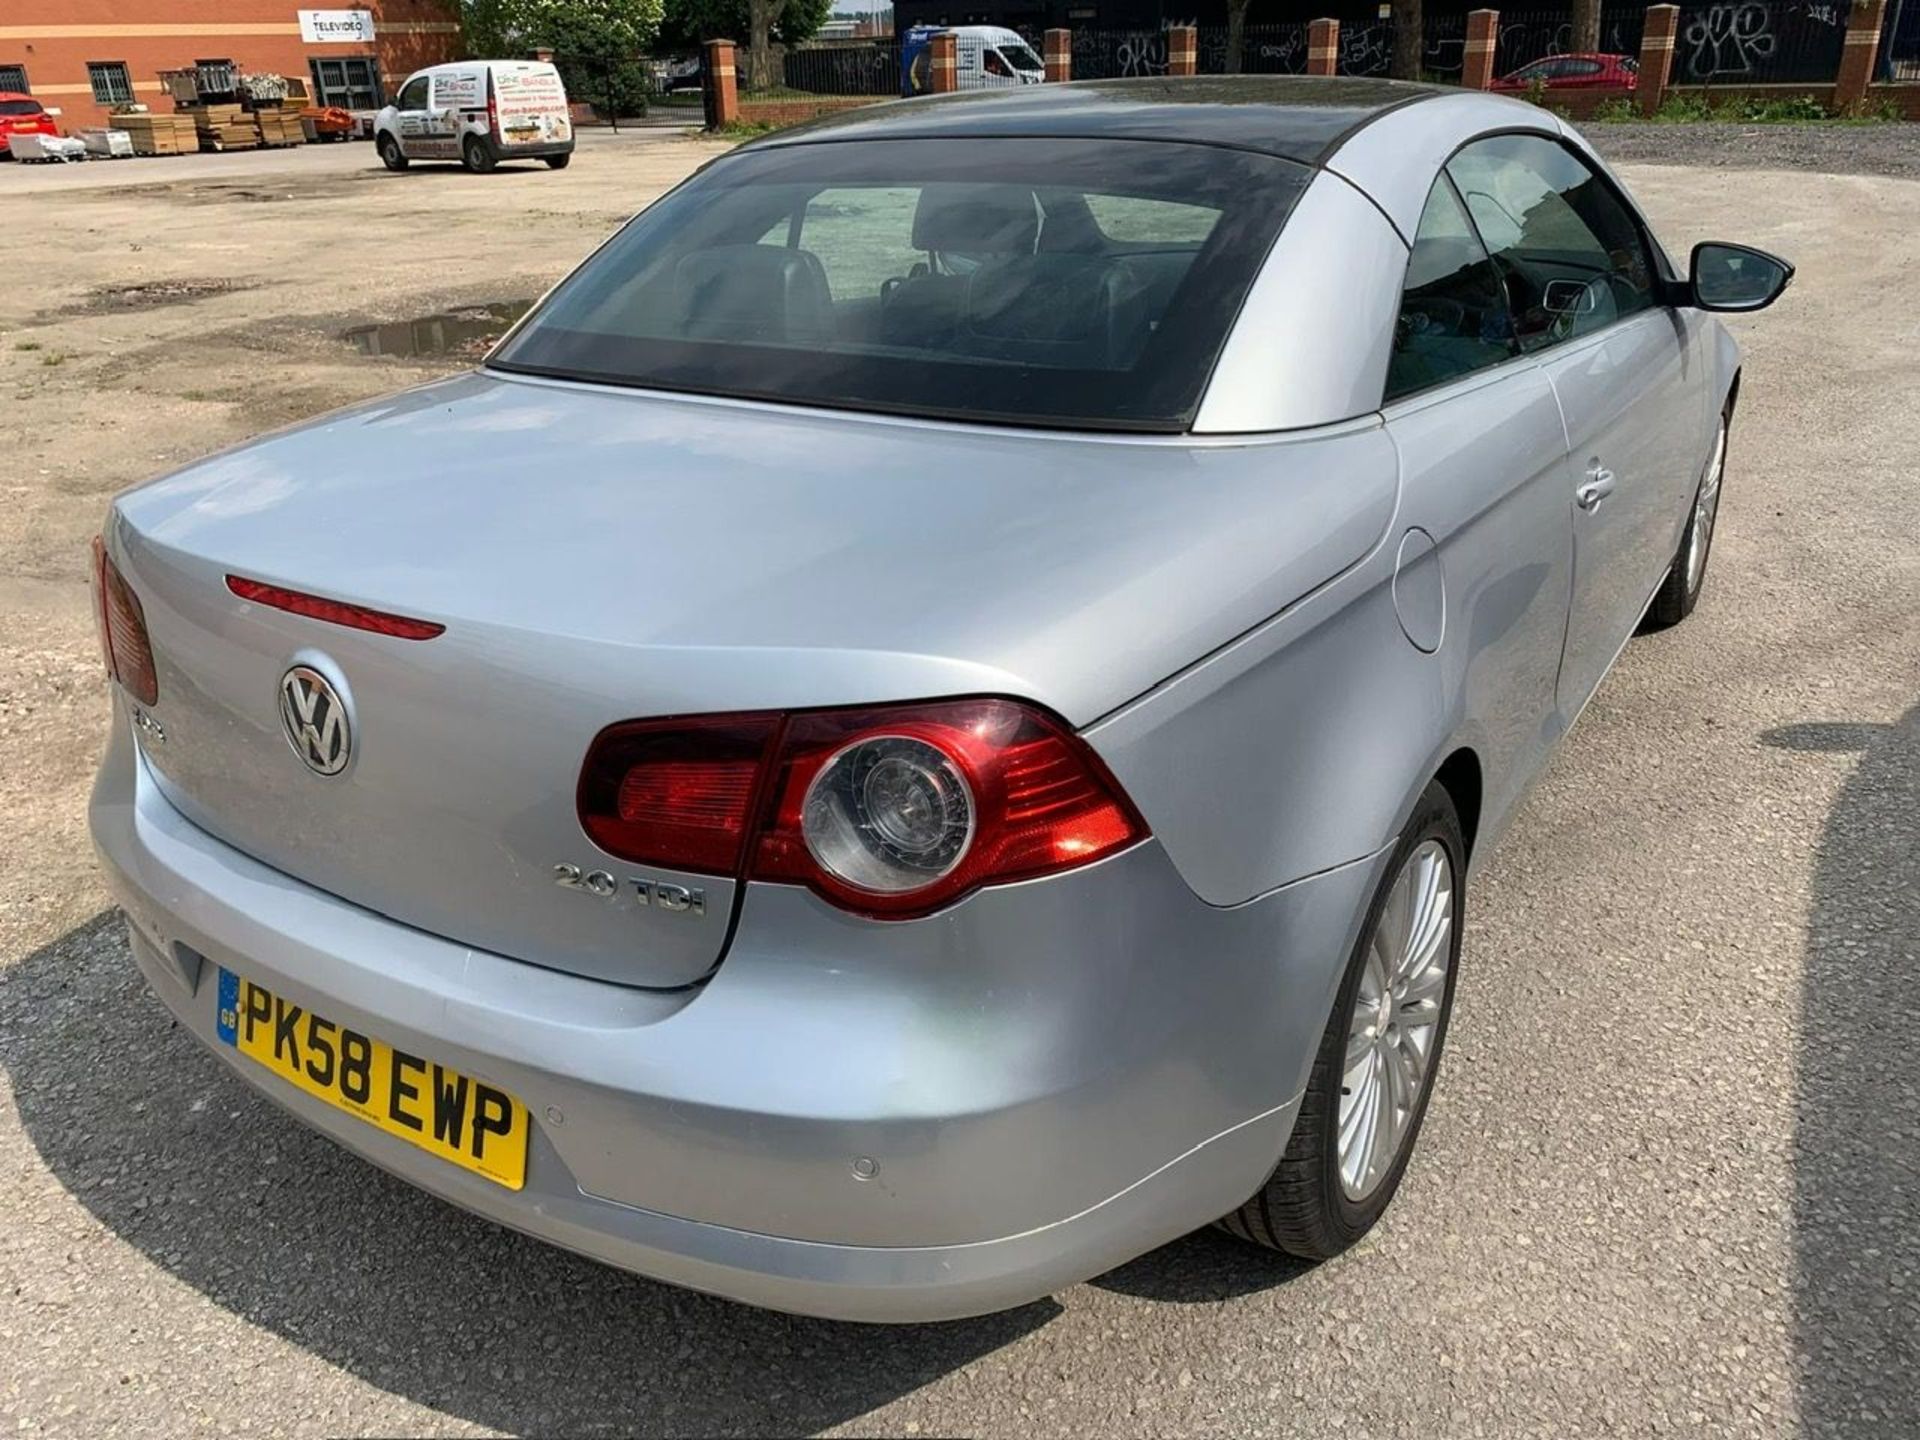 PK58 EWP VOLKSWAGEN EOS SILVER DIESEL MOT: 02.09.24 First Registration: 15.10.08 Number of services: - Image 3 of 10